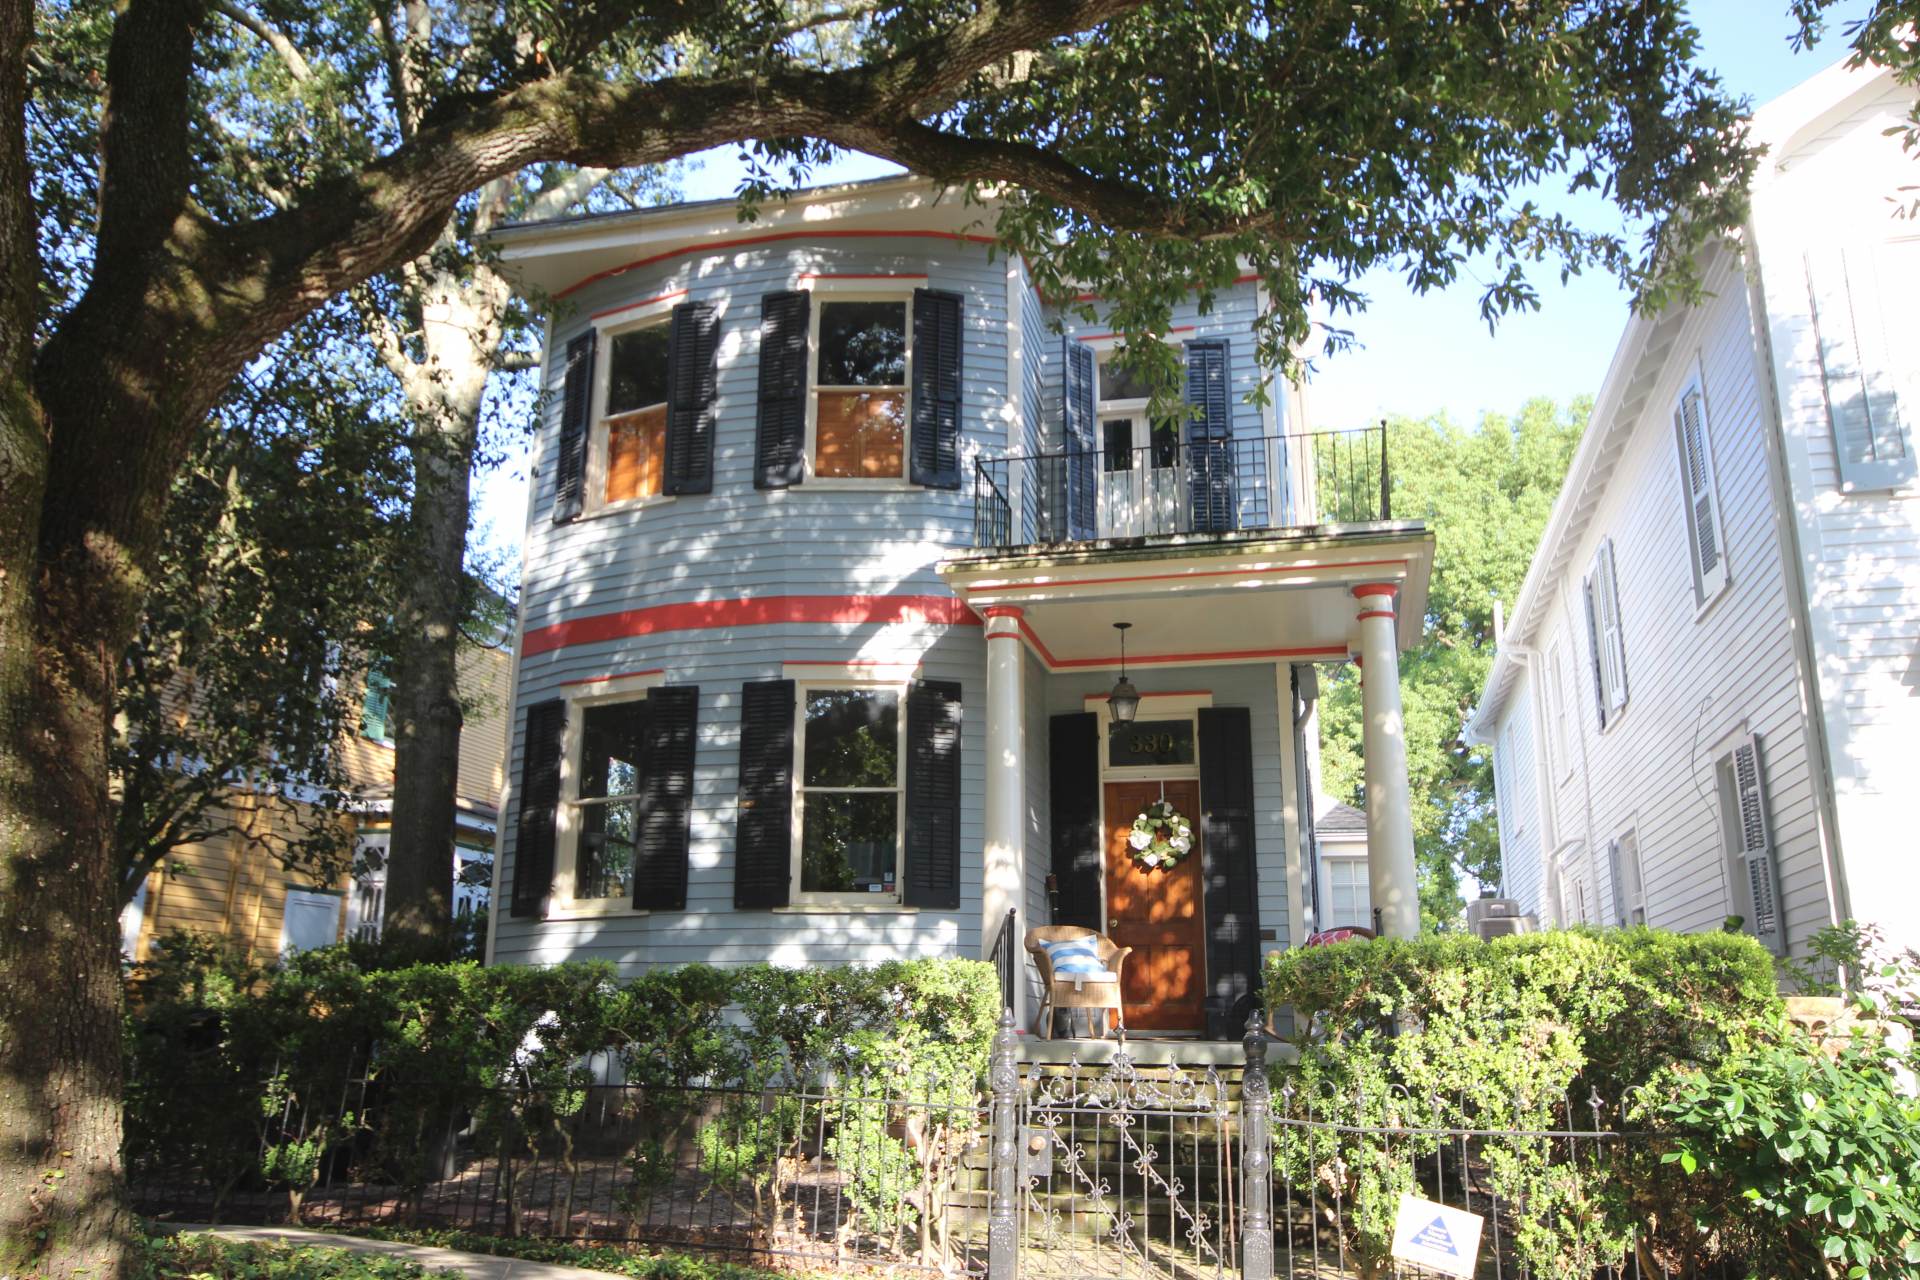 New Bayou City Exteriors for Small Space